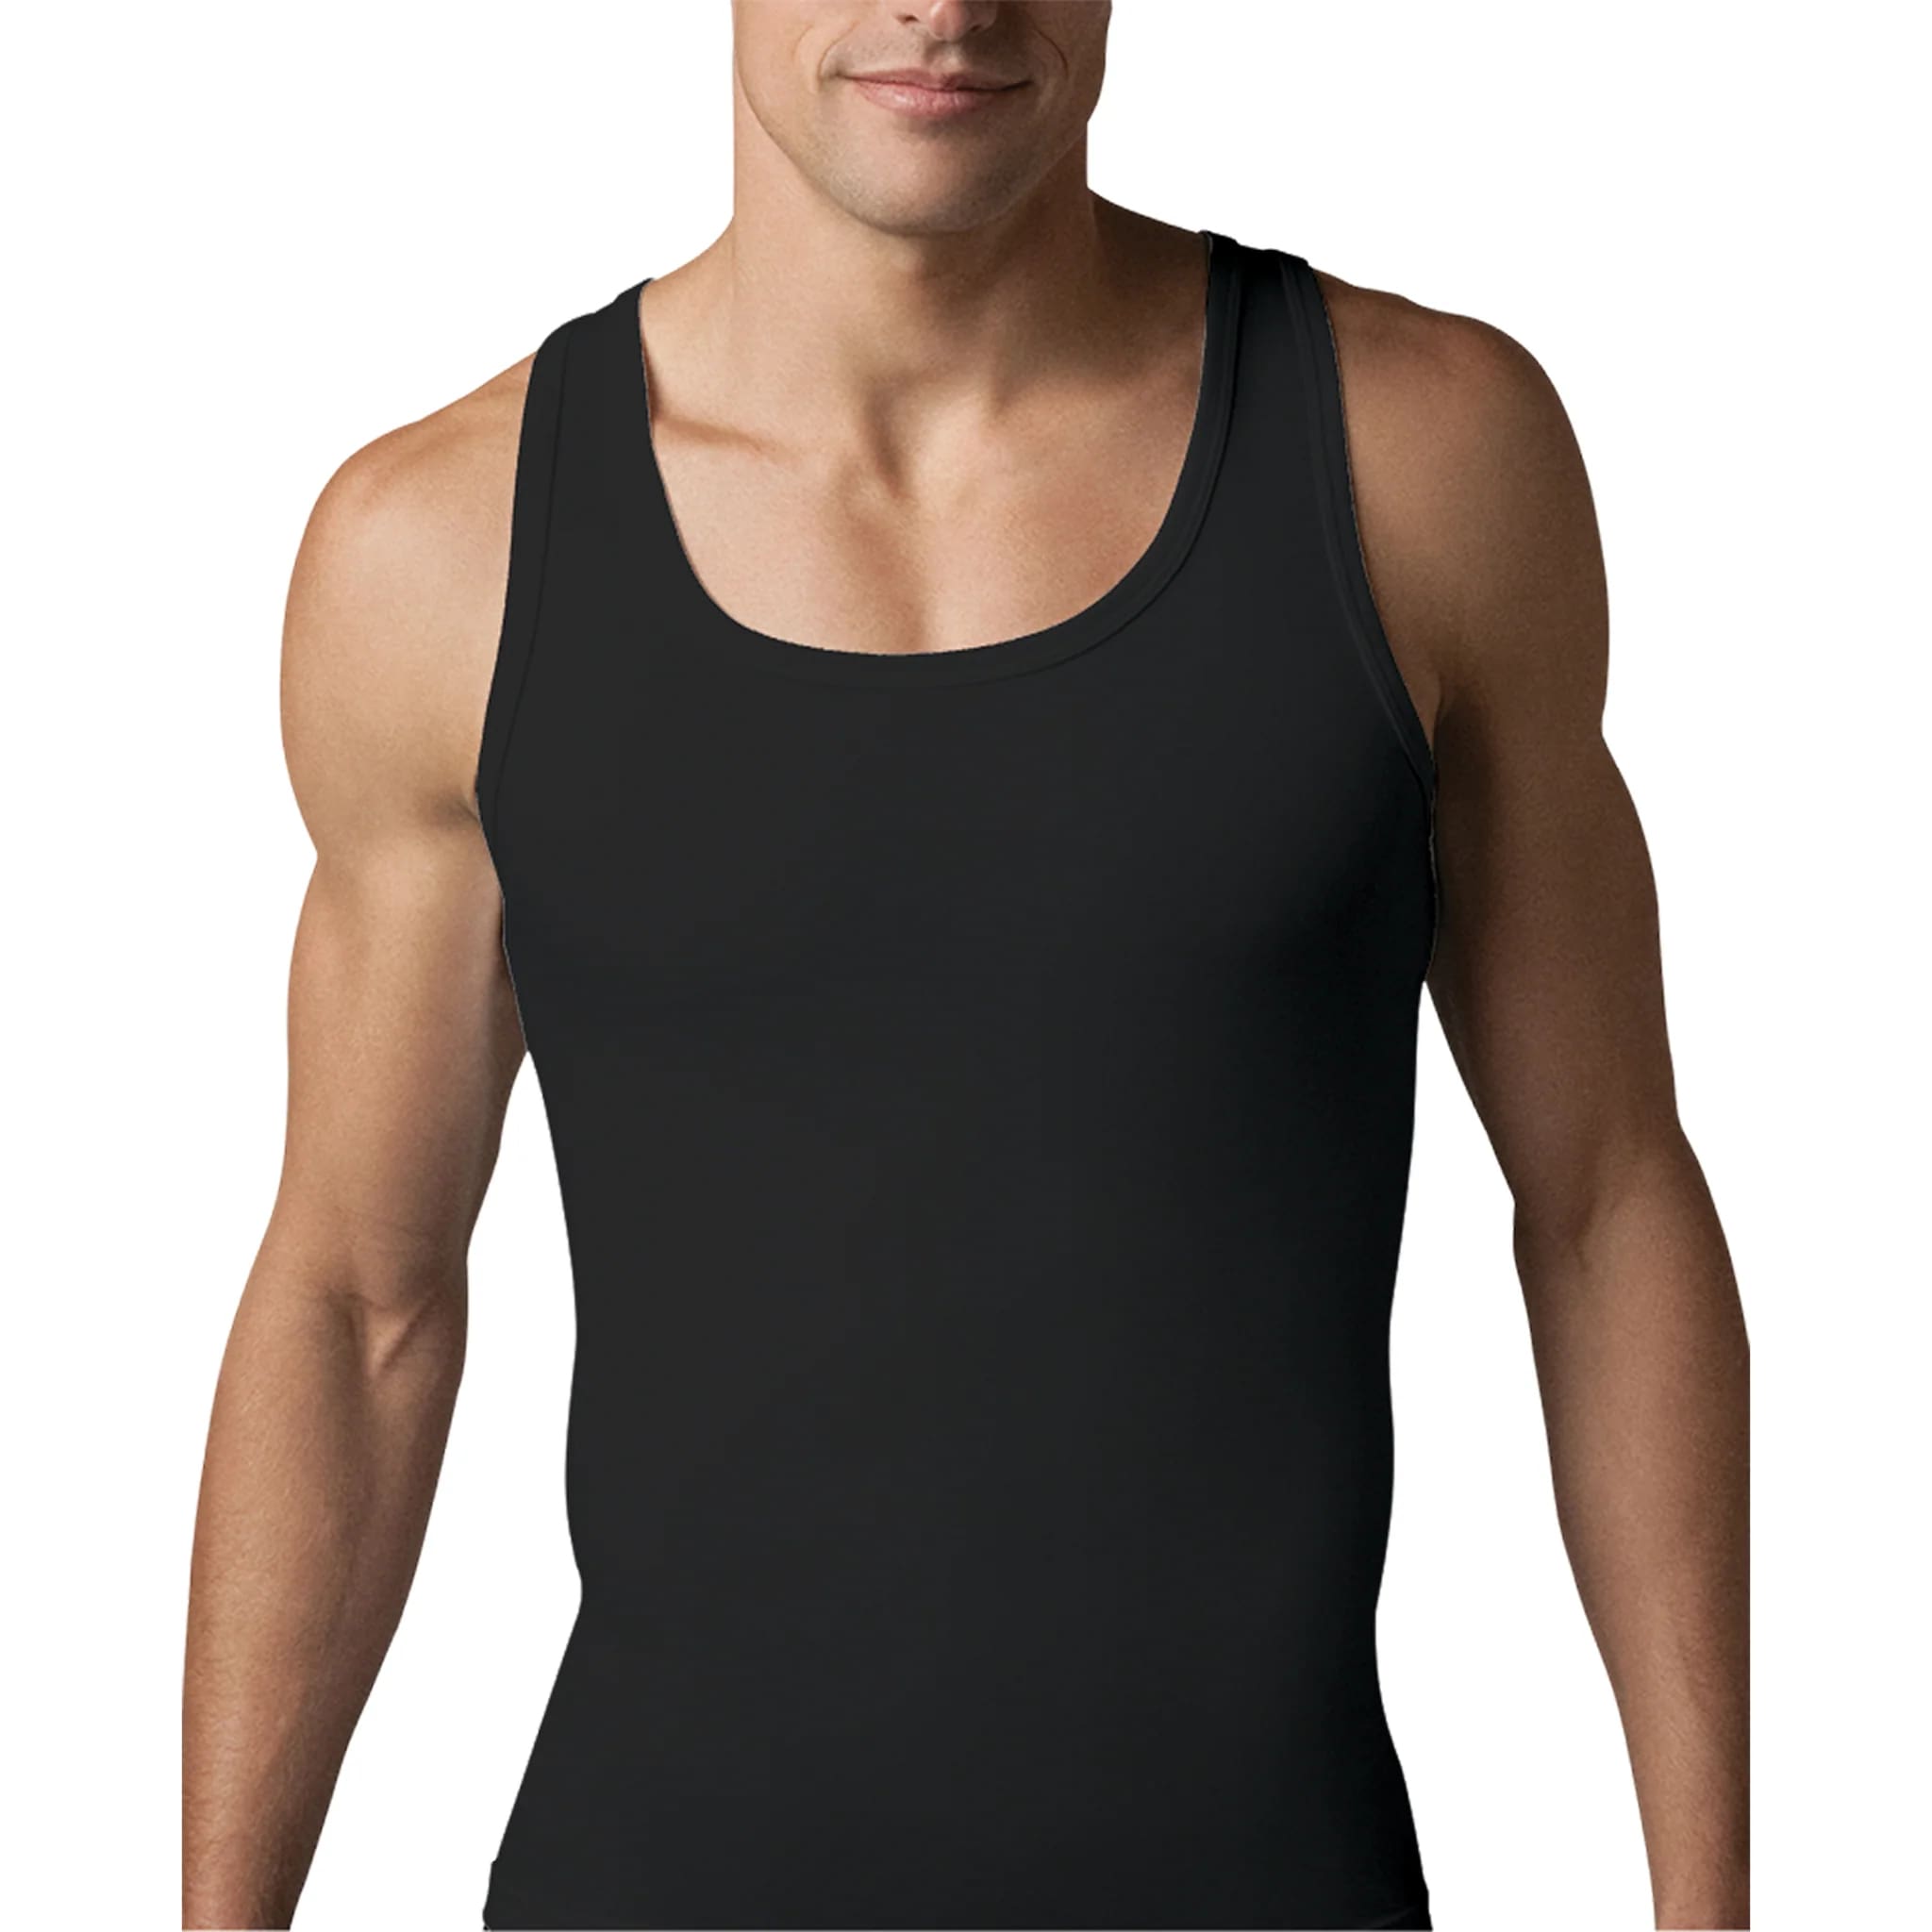 100% Cotton Tank Top 1 pack Color Navy from al samah